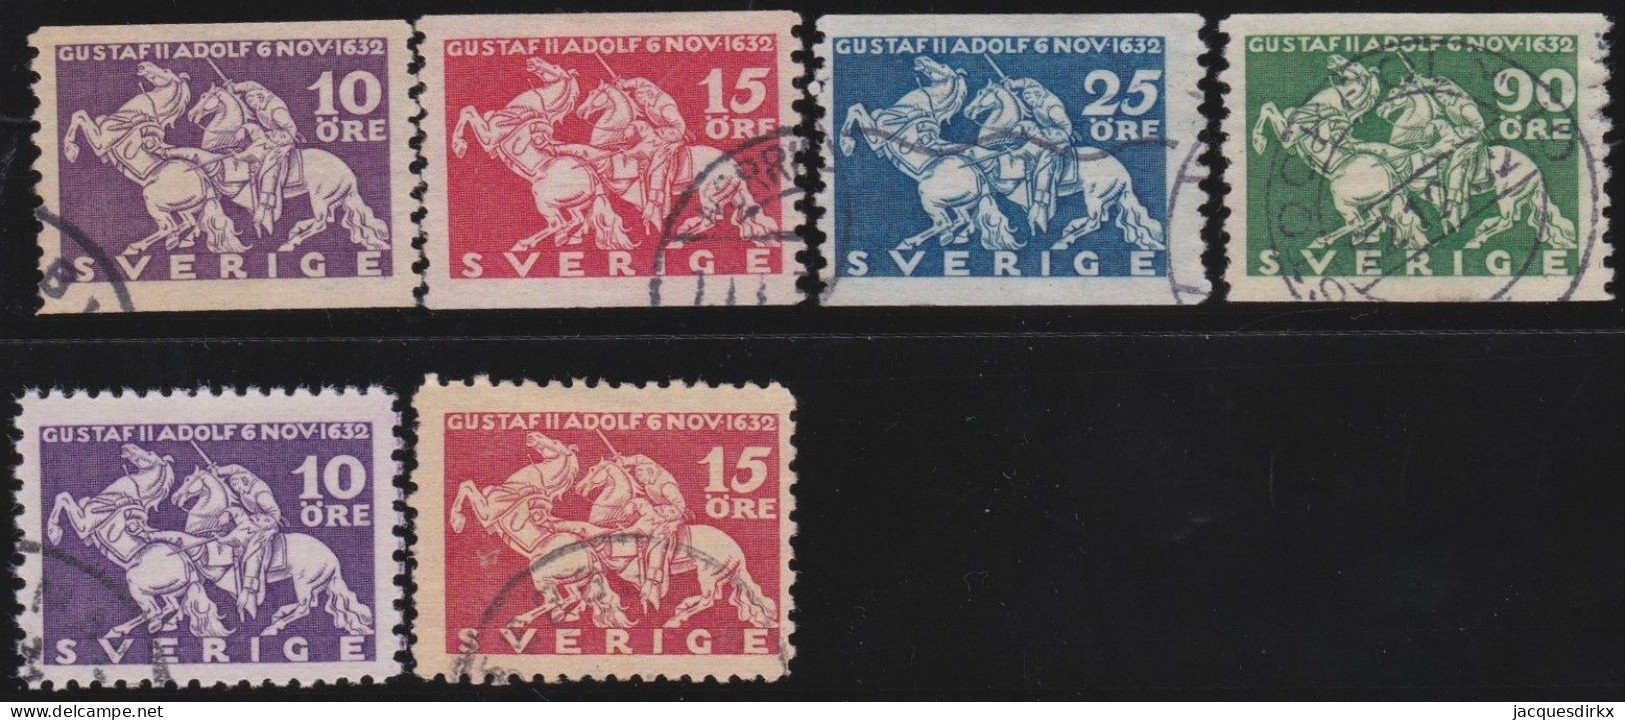 Sweden   .    Y&T   .  224/227 + 224a/225a   .     O   .     Cancelled - Used Stamps